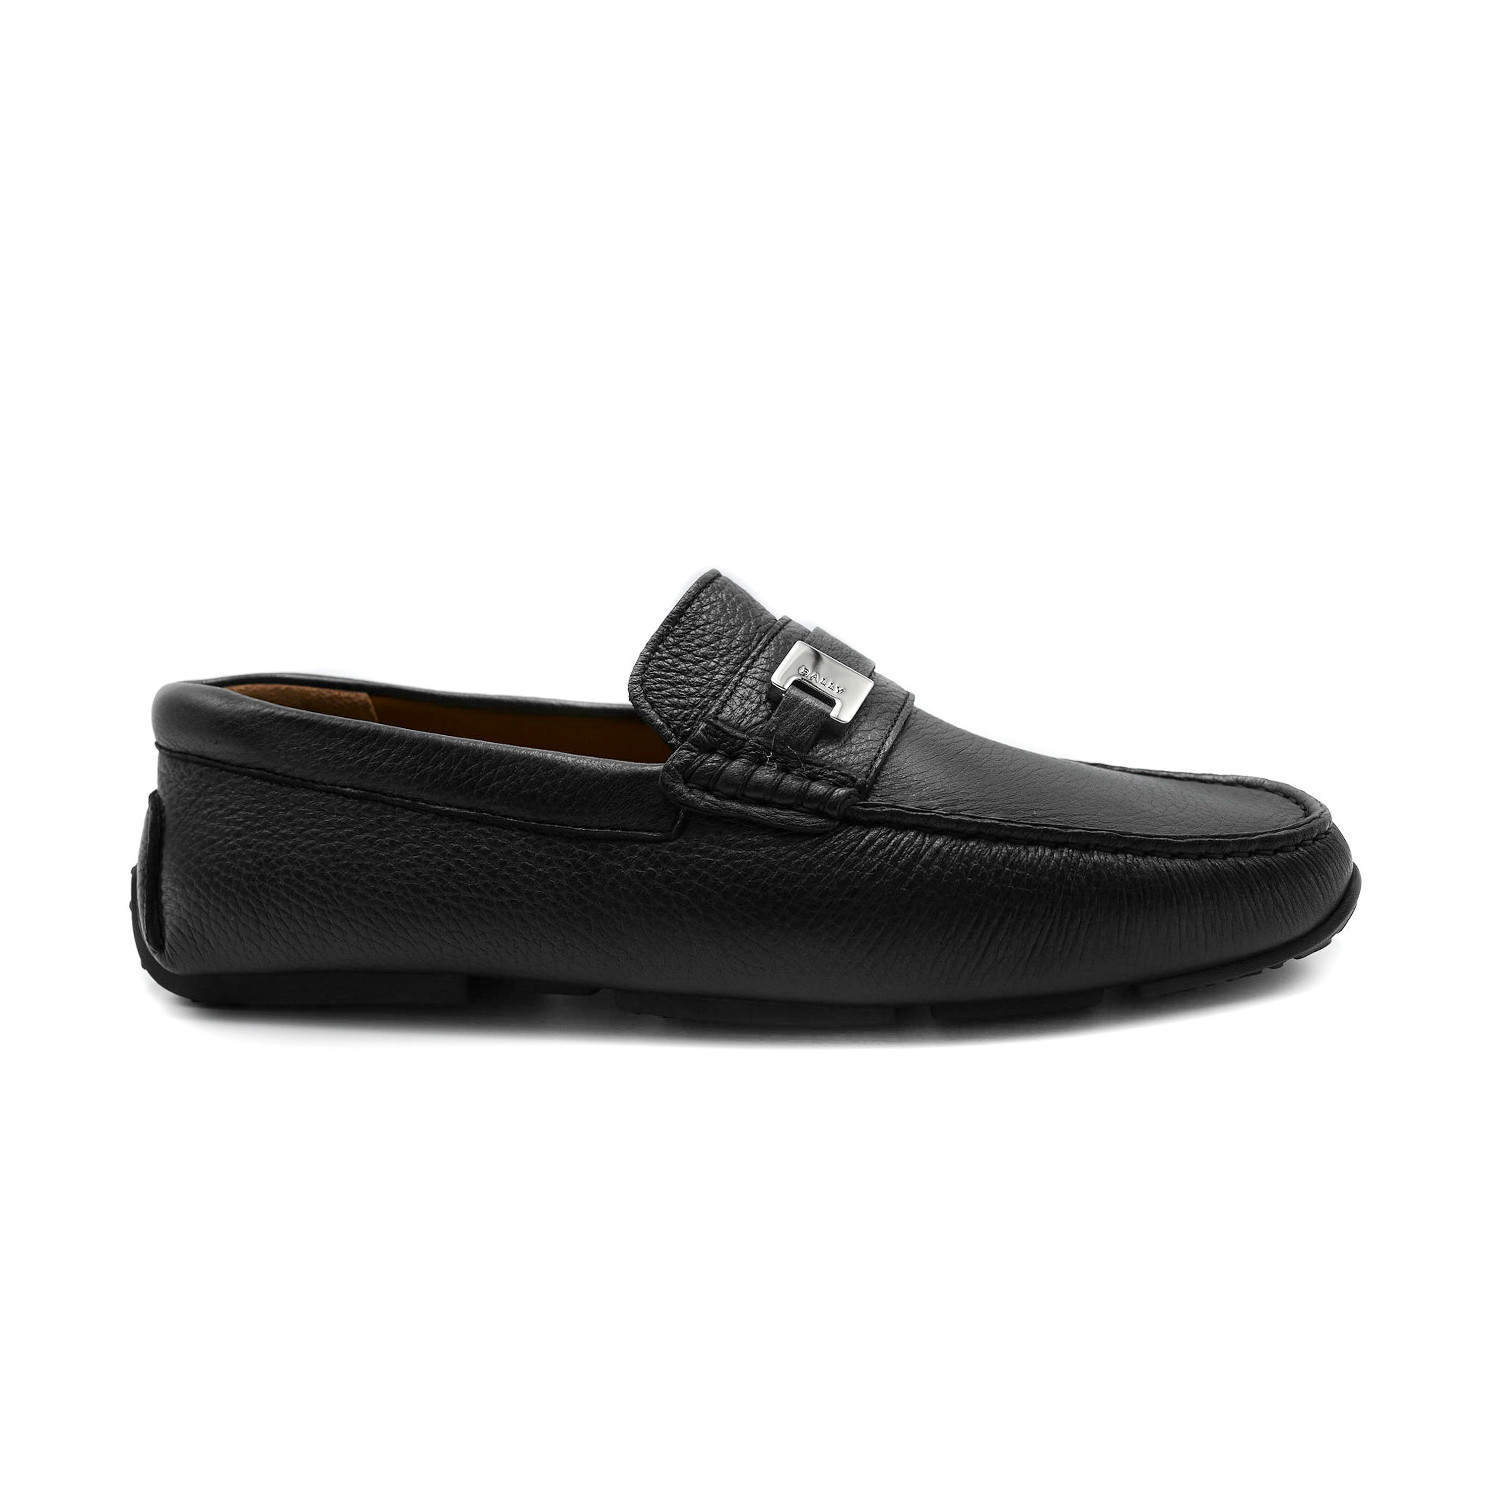 Men's Picaro Grained Deer Leather Driver Shoes // Black (US: 7) - Bally ...